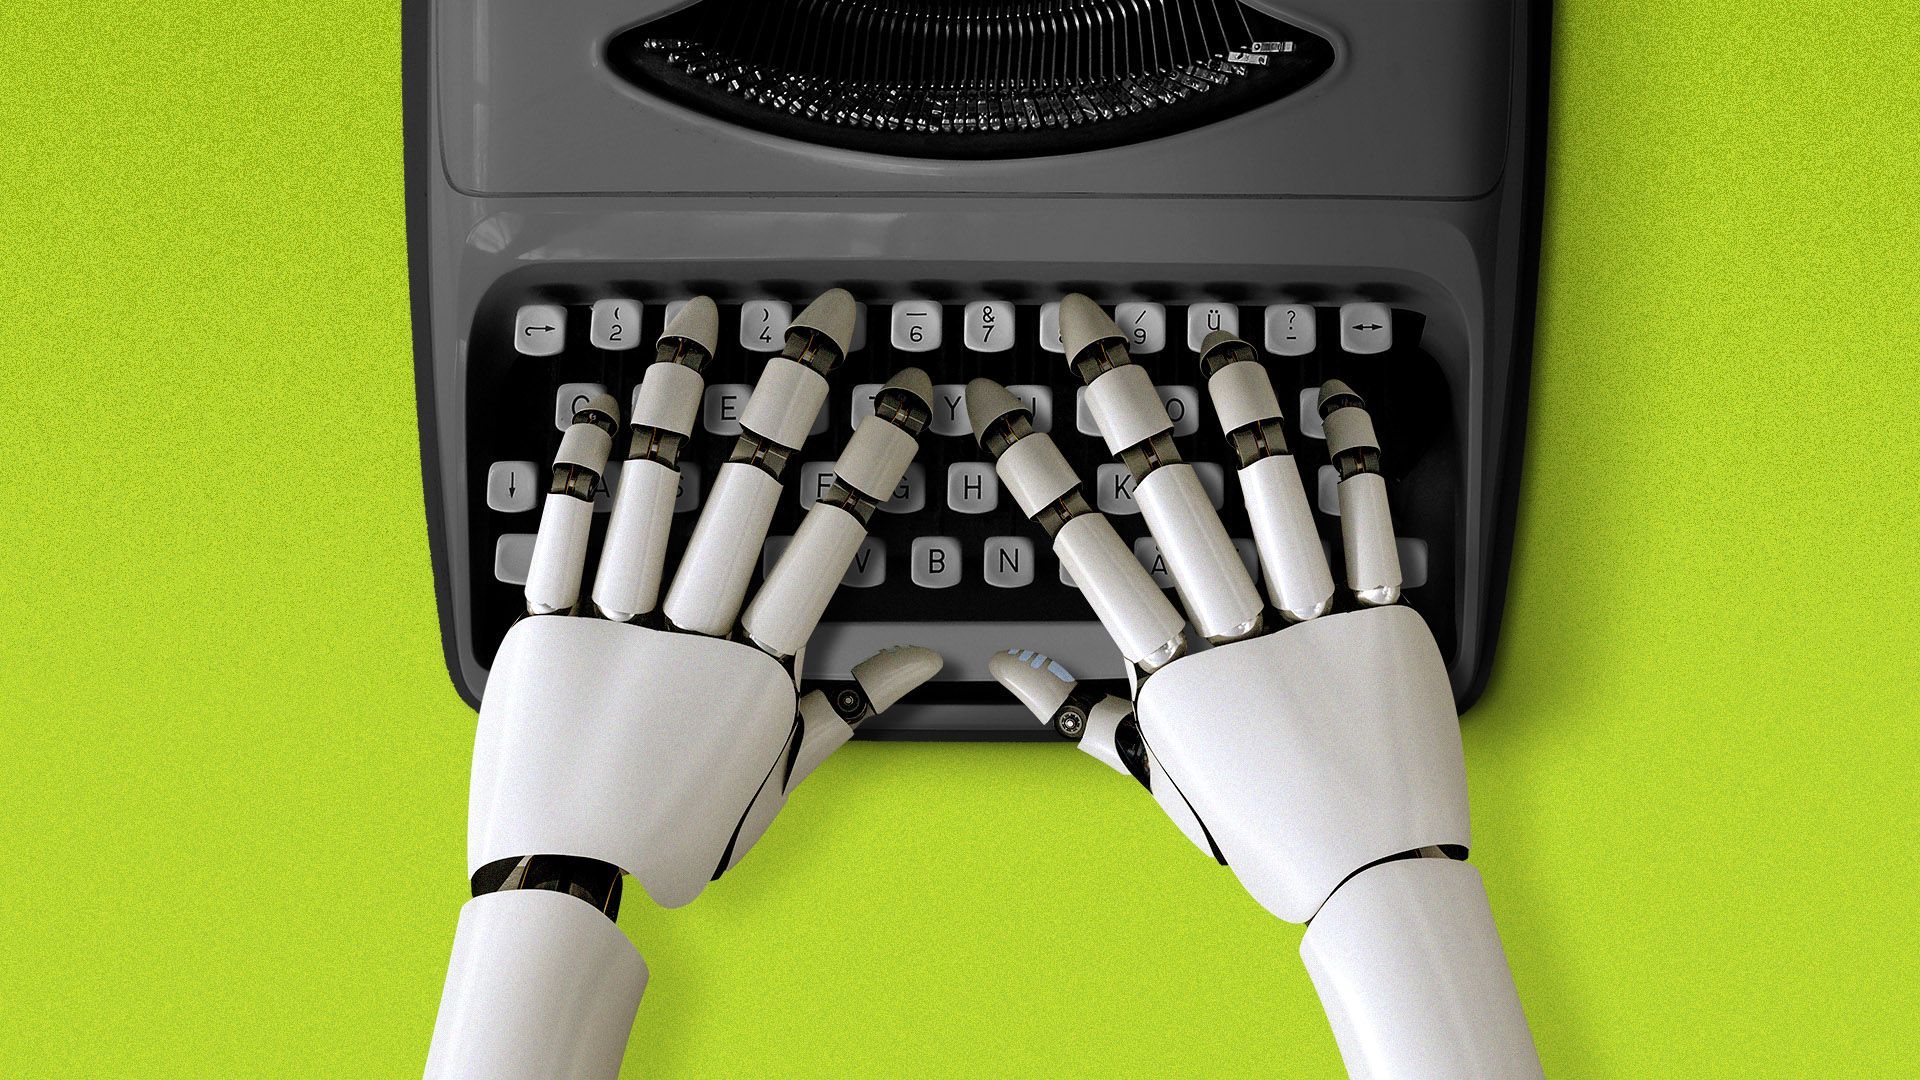 Illustration of robot hands typing on a typewriter.